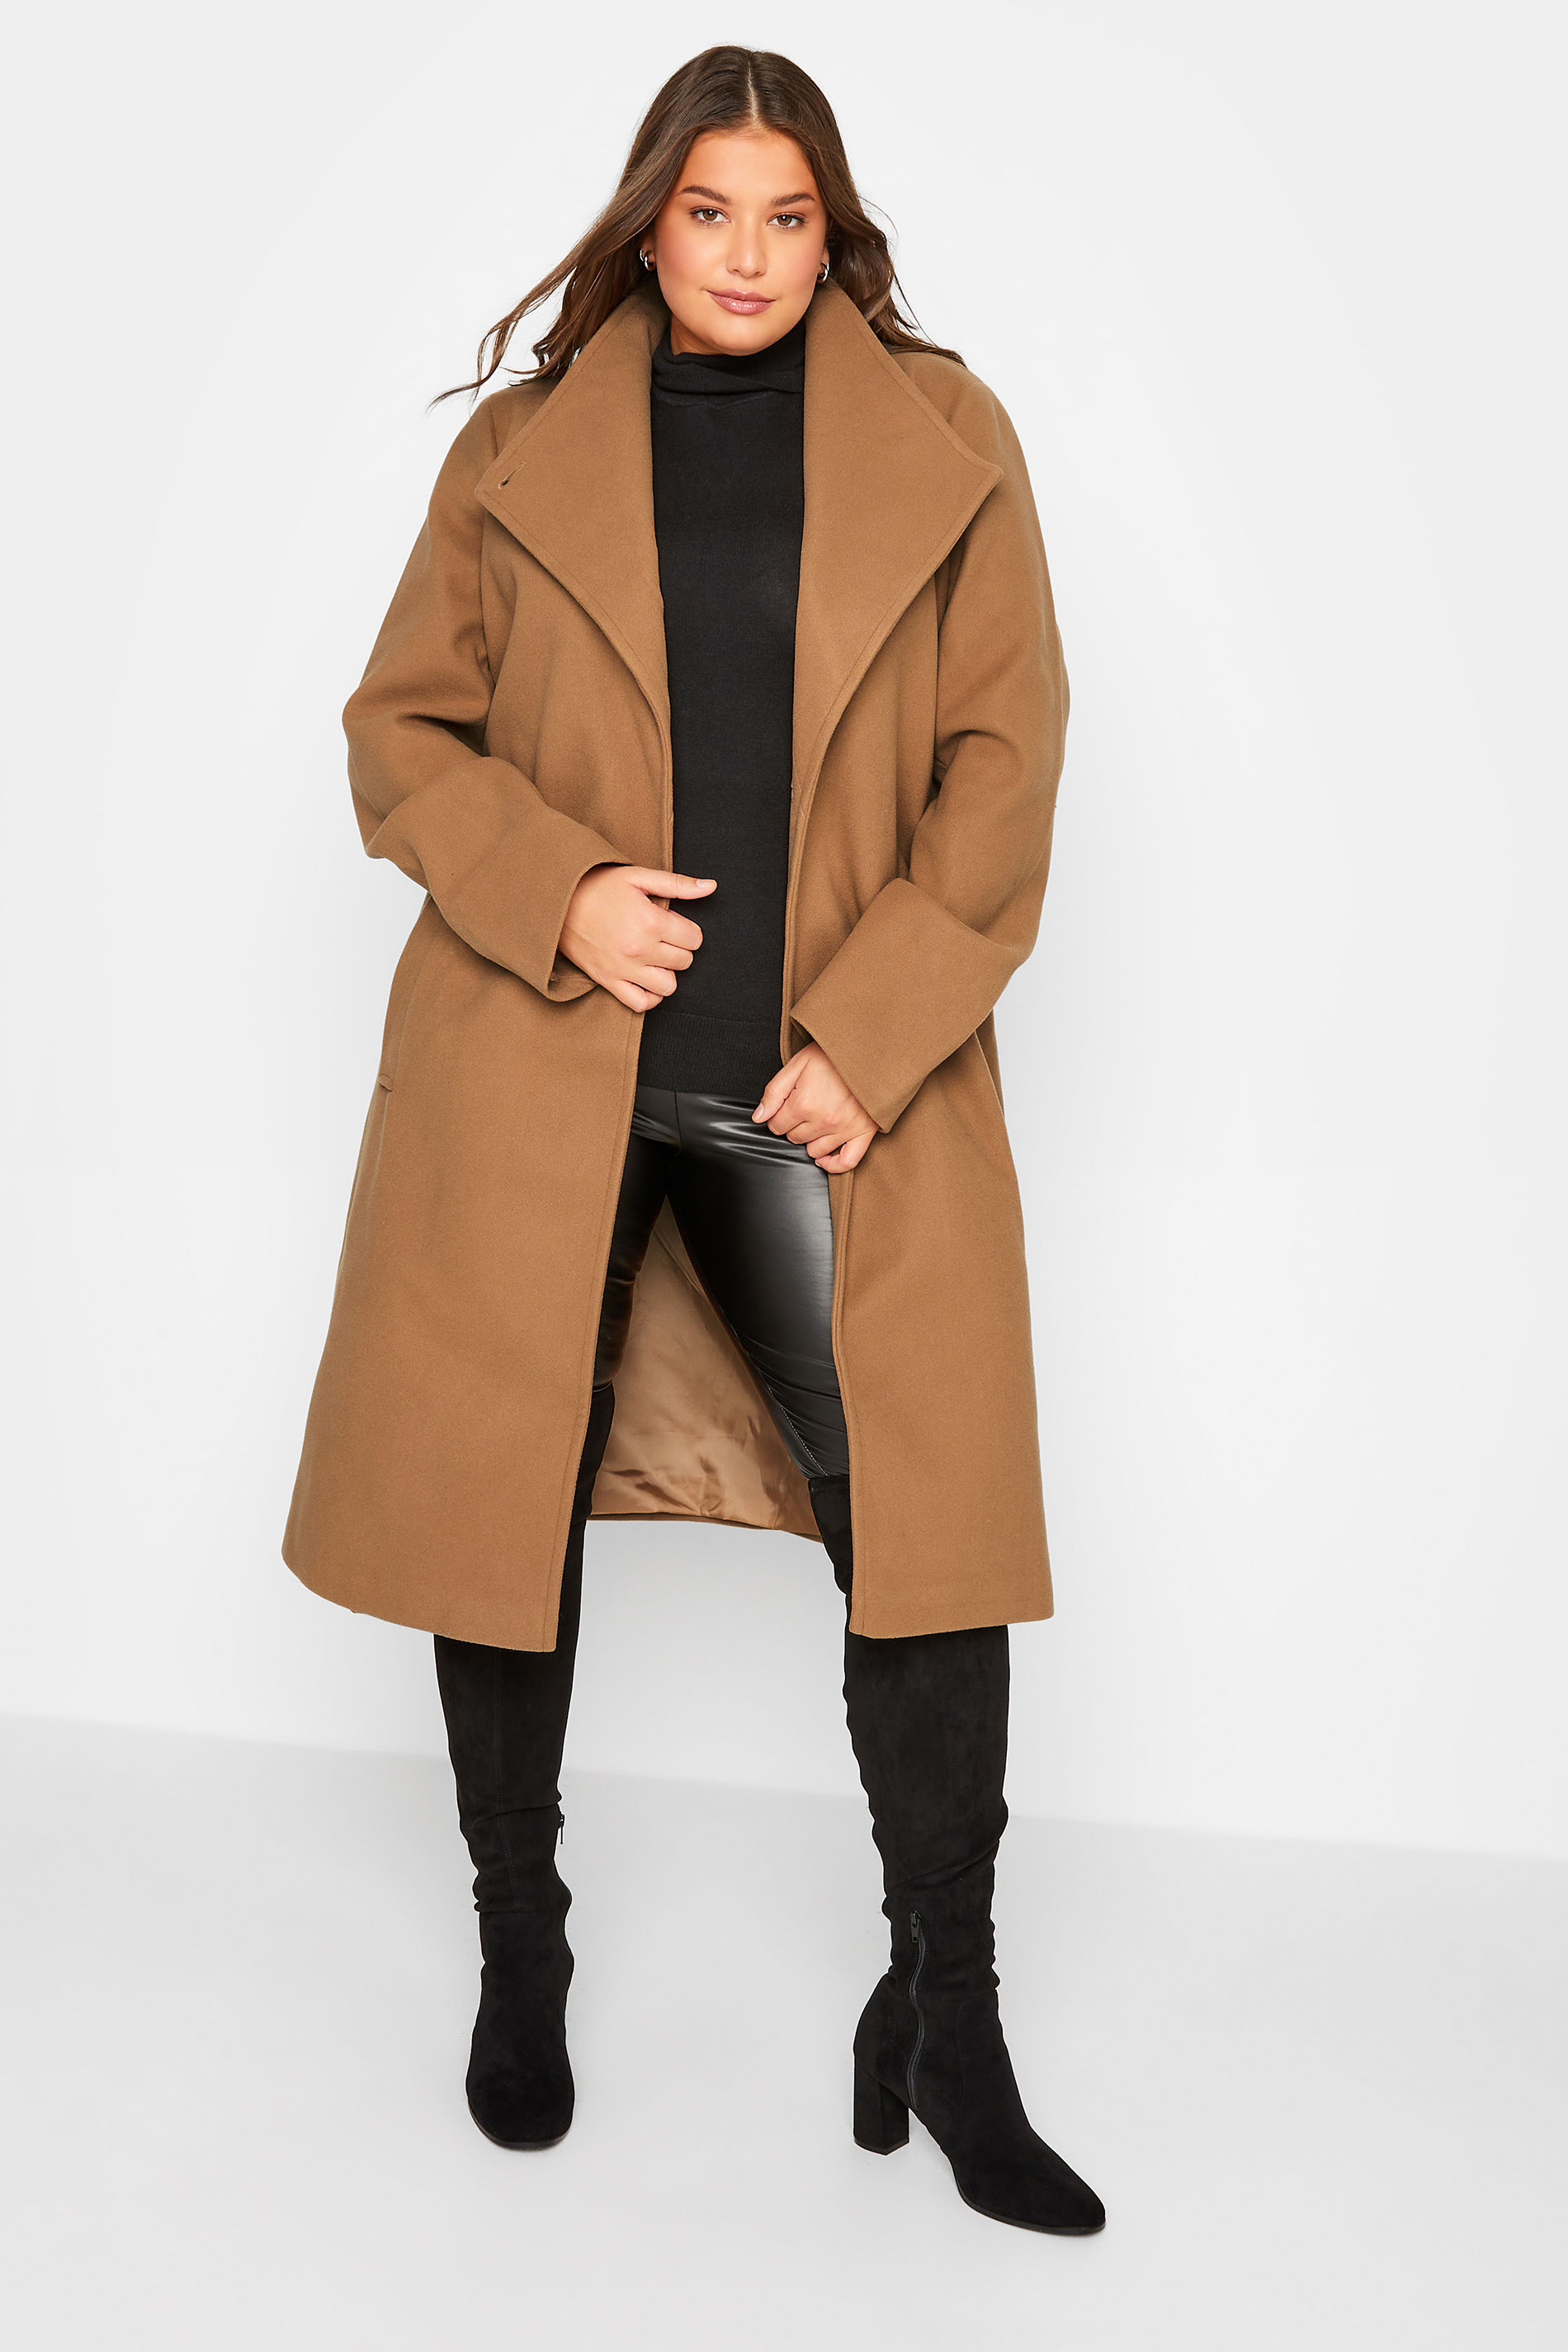 LTS Tall Women's Tan Brown Belted Coat | Long Tall Sally 1